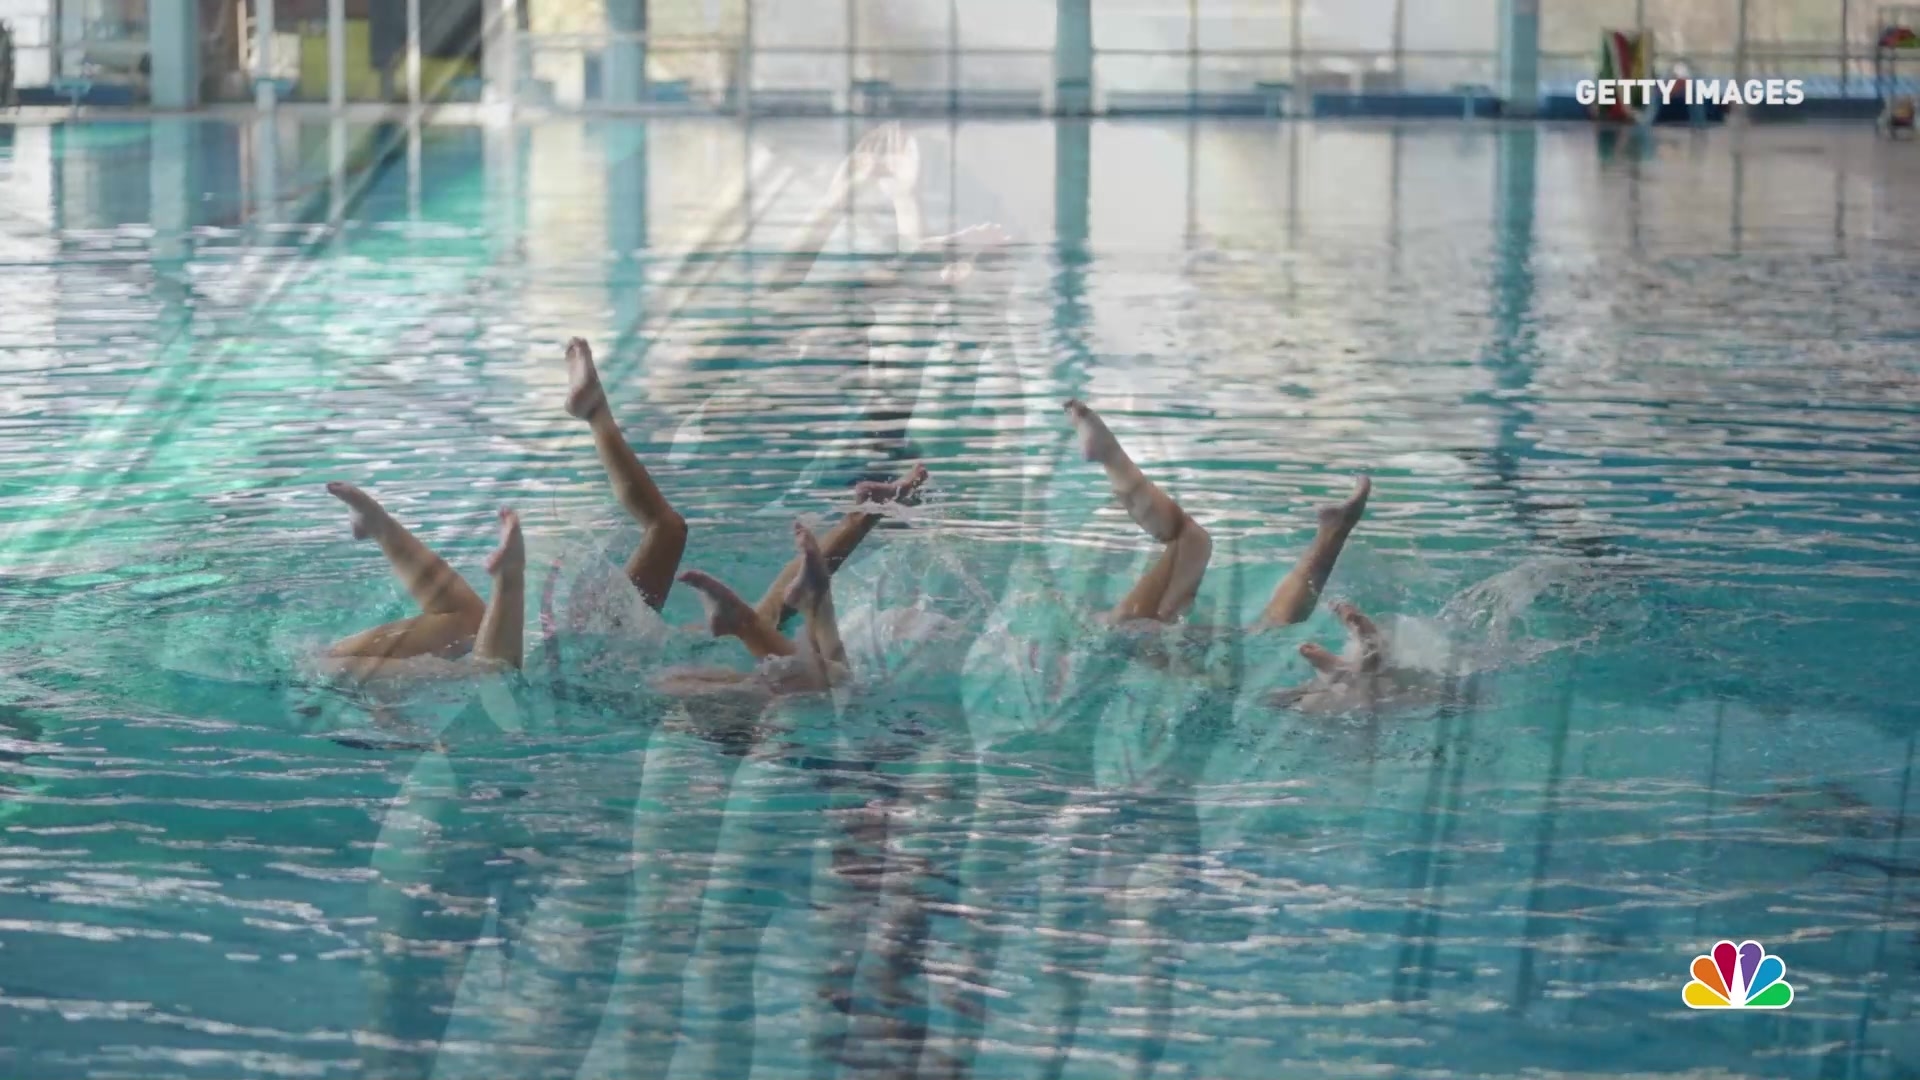 What is Artistic Swimming? Why the Sports Name Changed From Synchronized Swimming